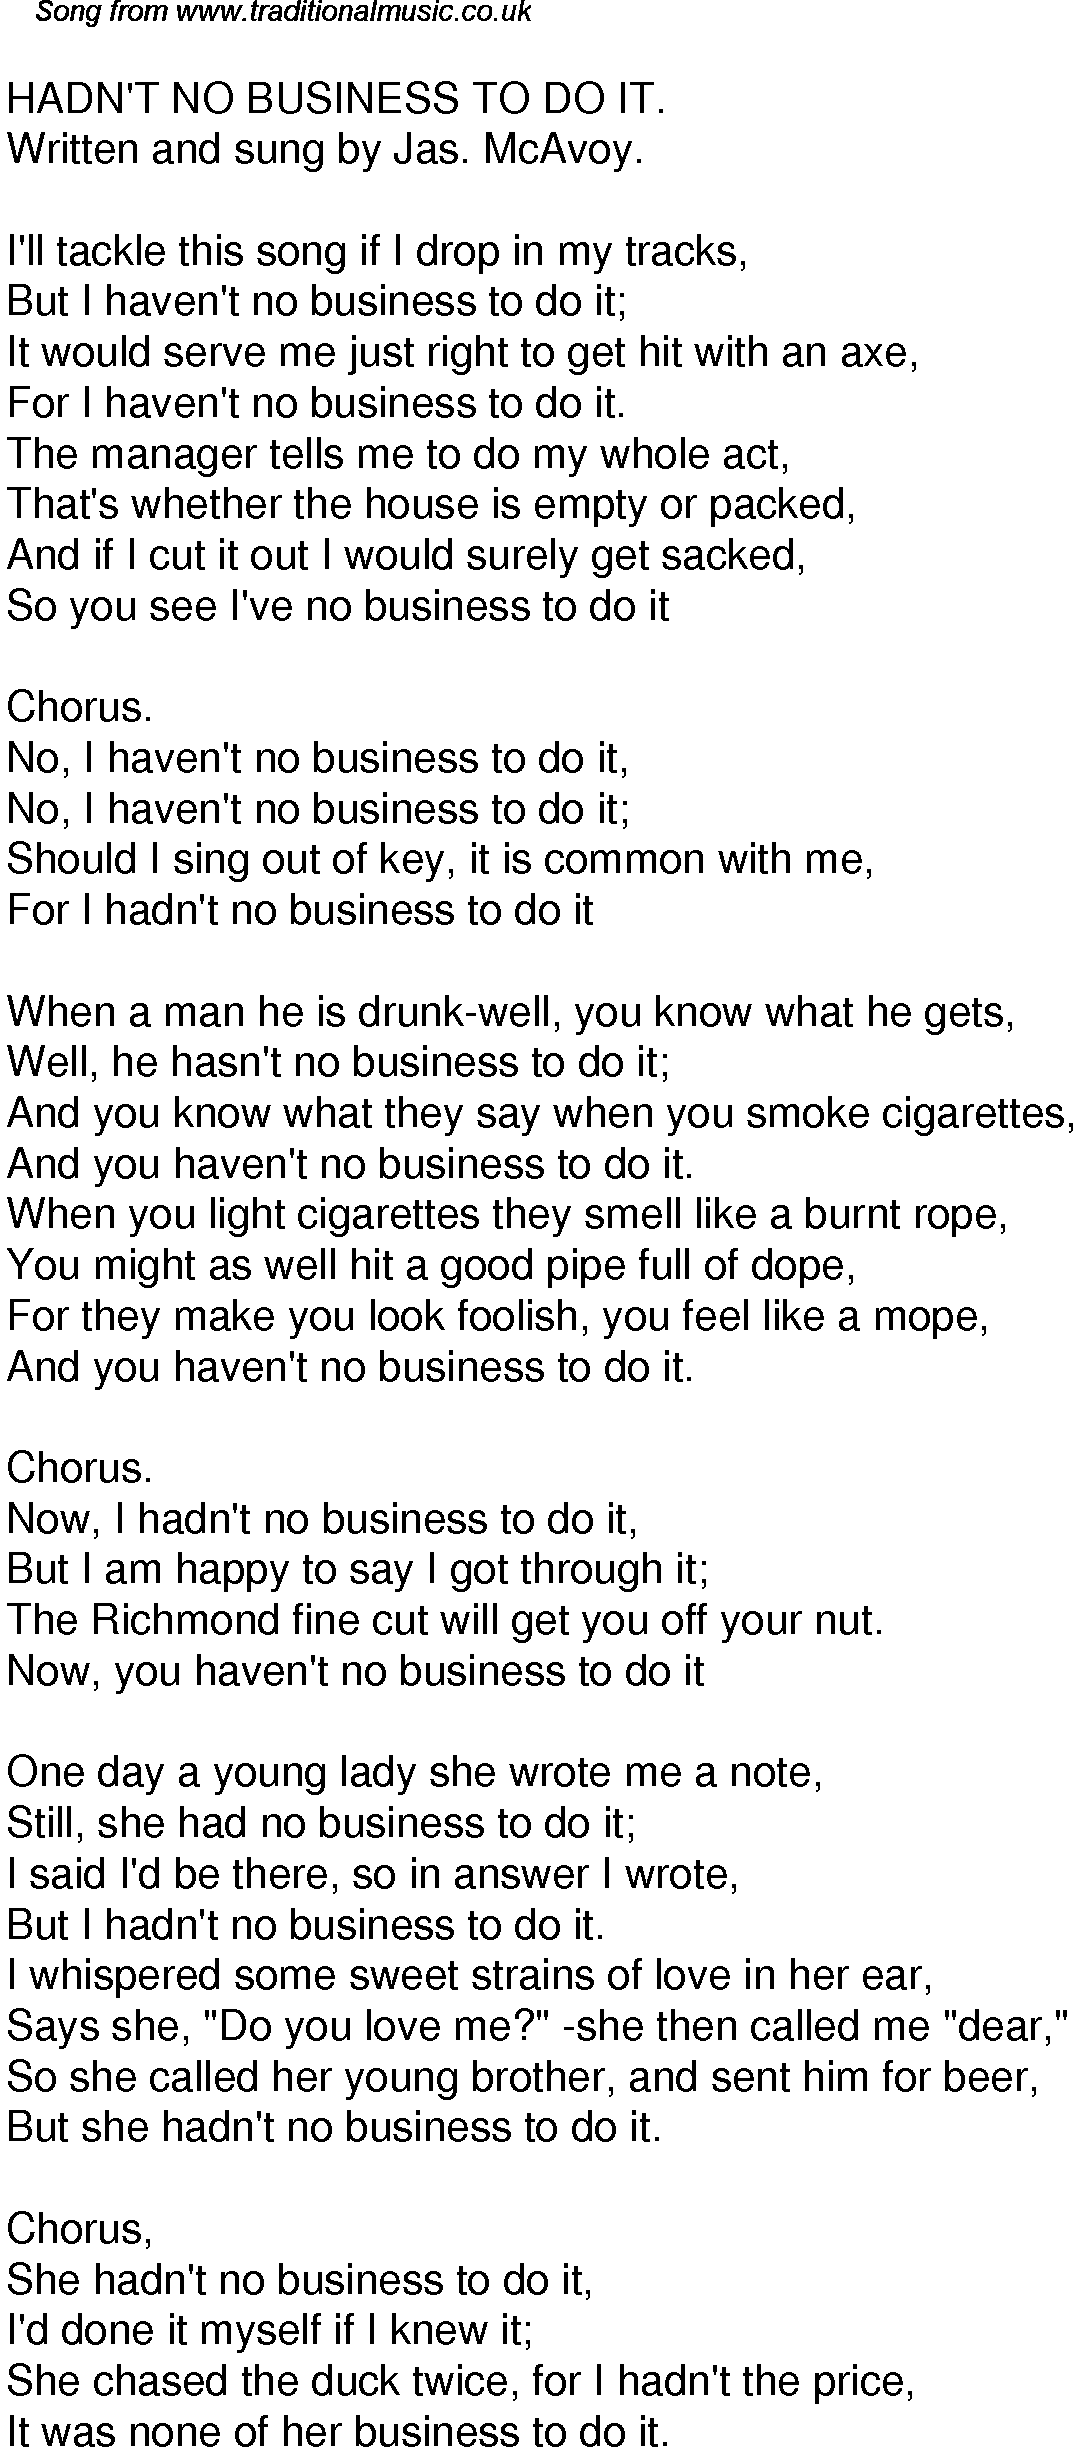 Old Time Song Lyrics for 42 Hadnt No Business To Do It